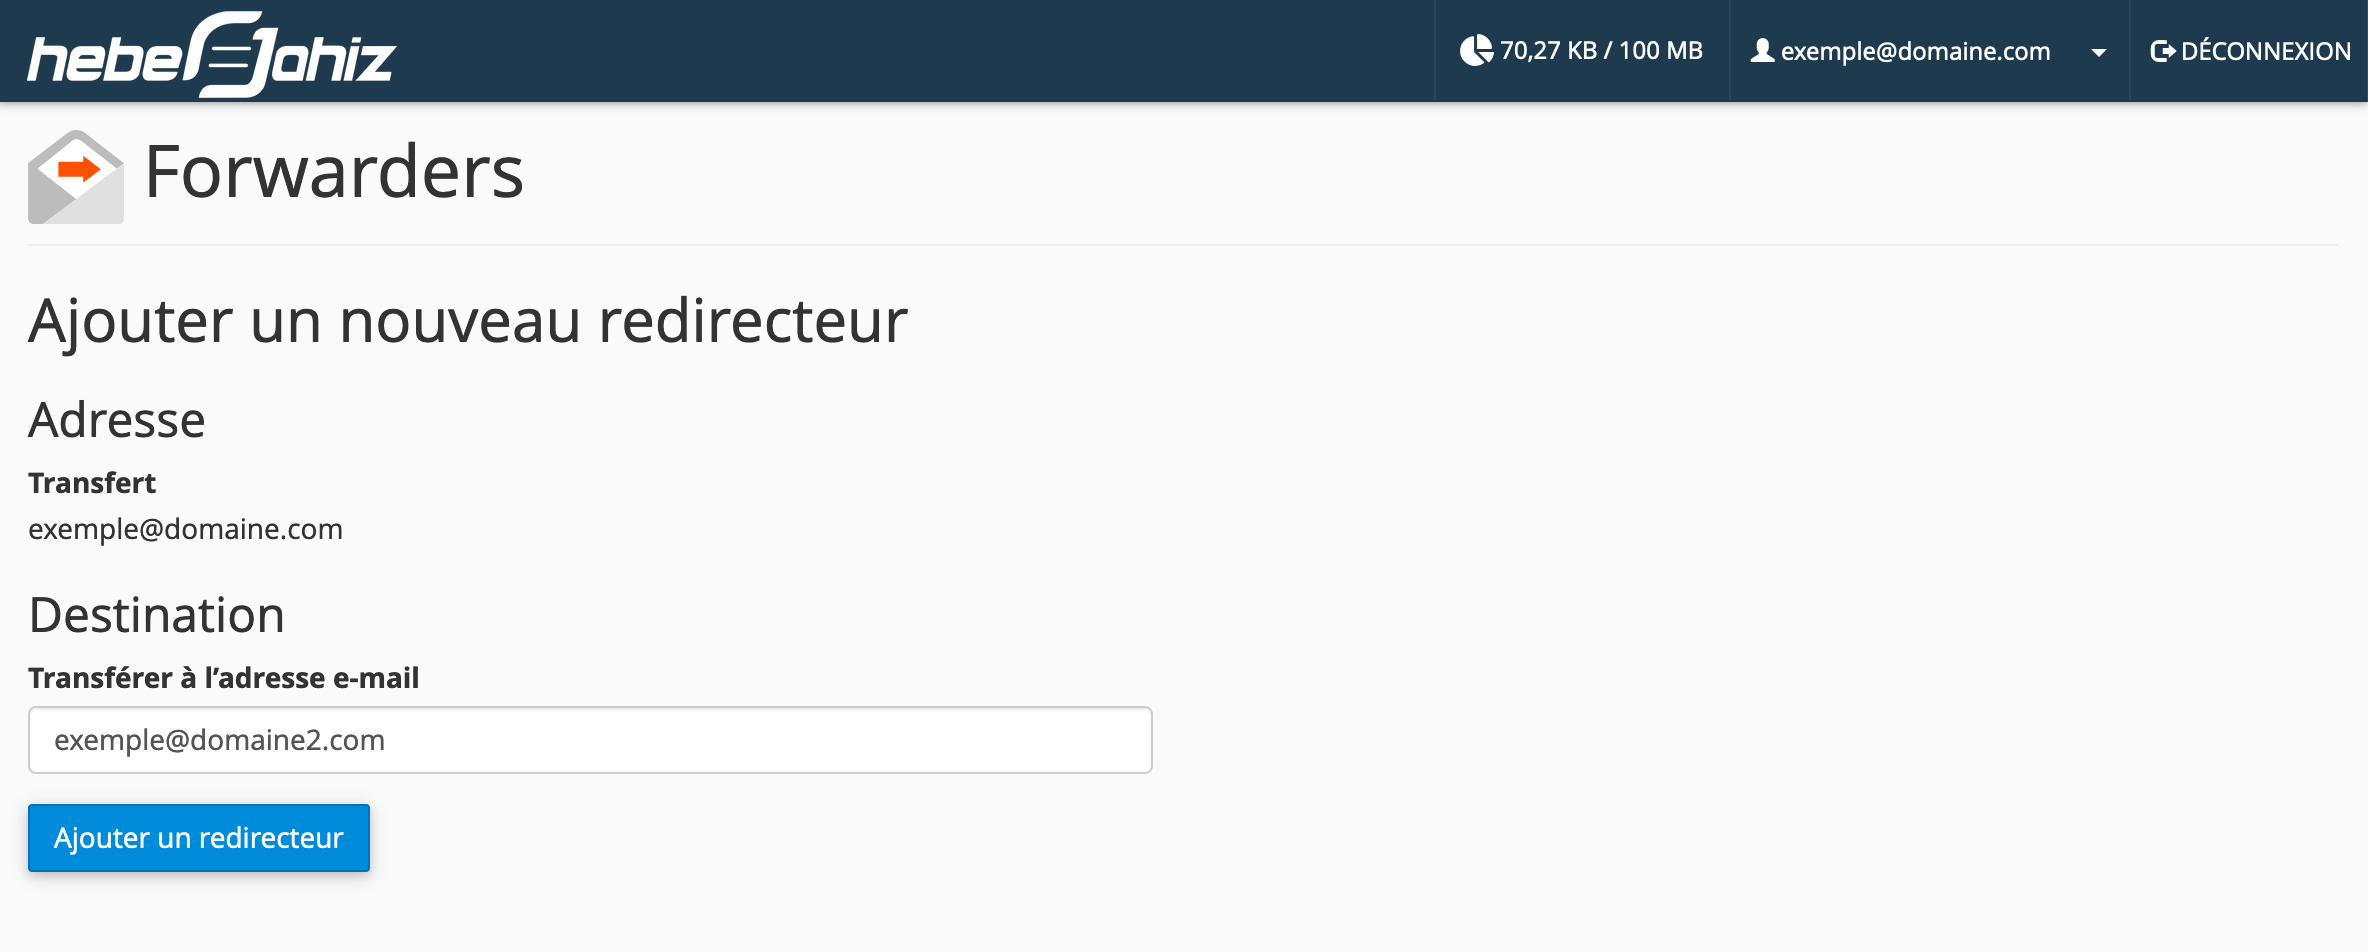 Webmail - Ajuter une redirection email